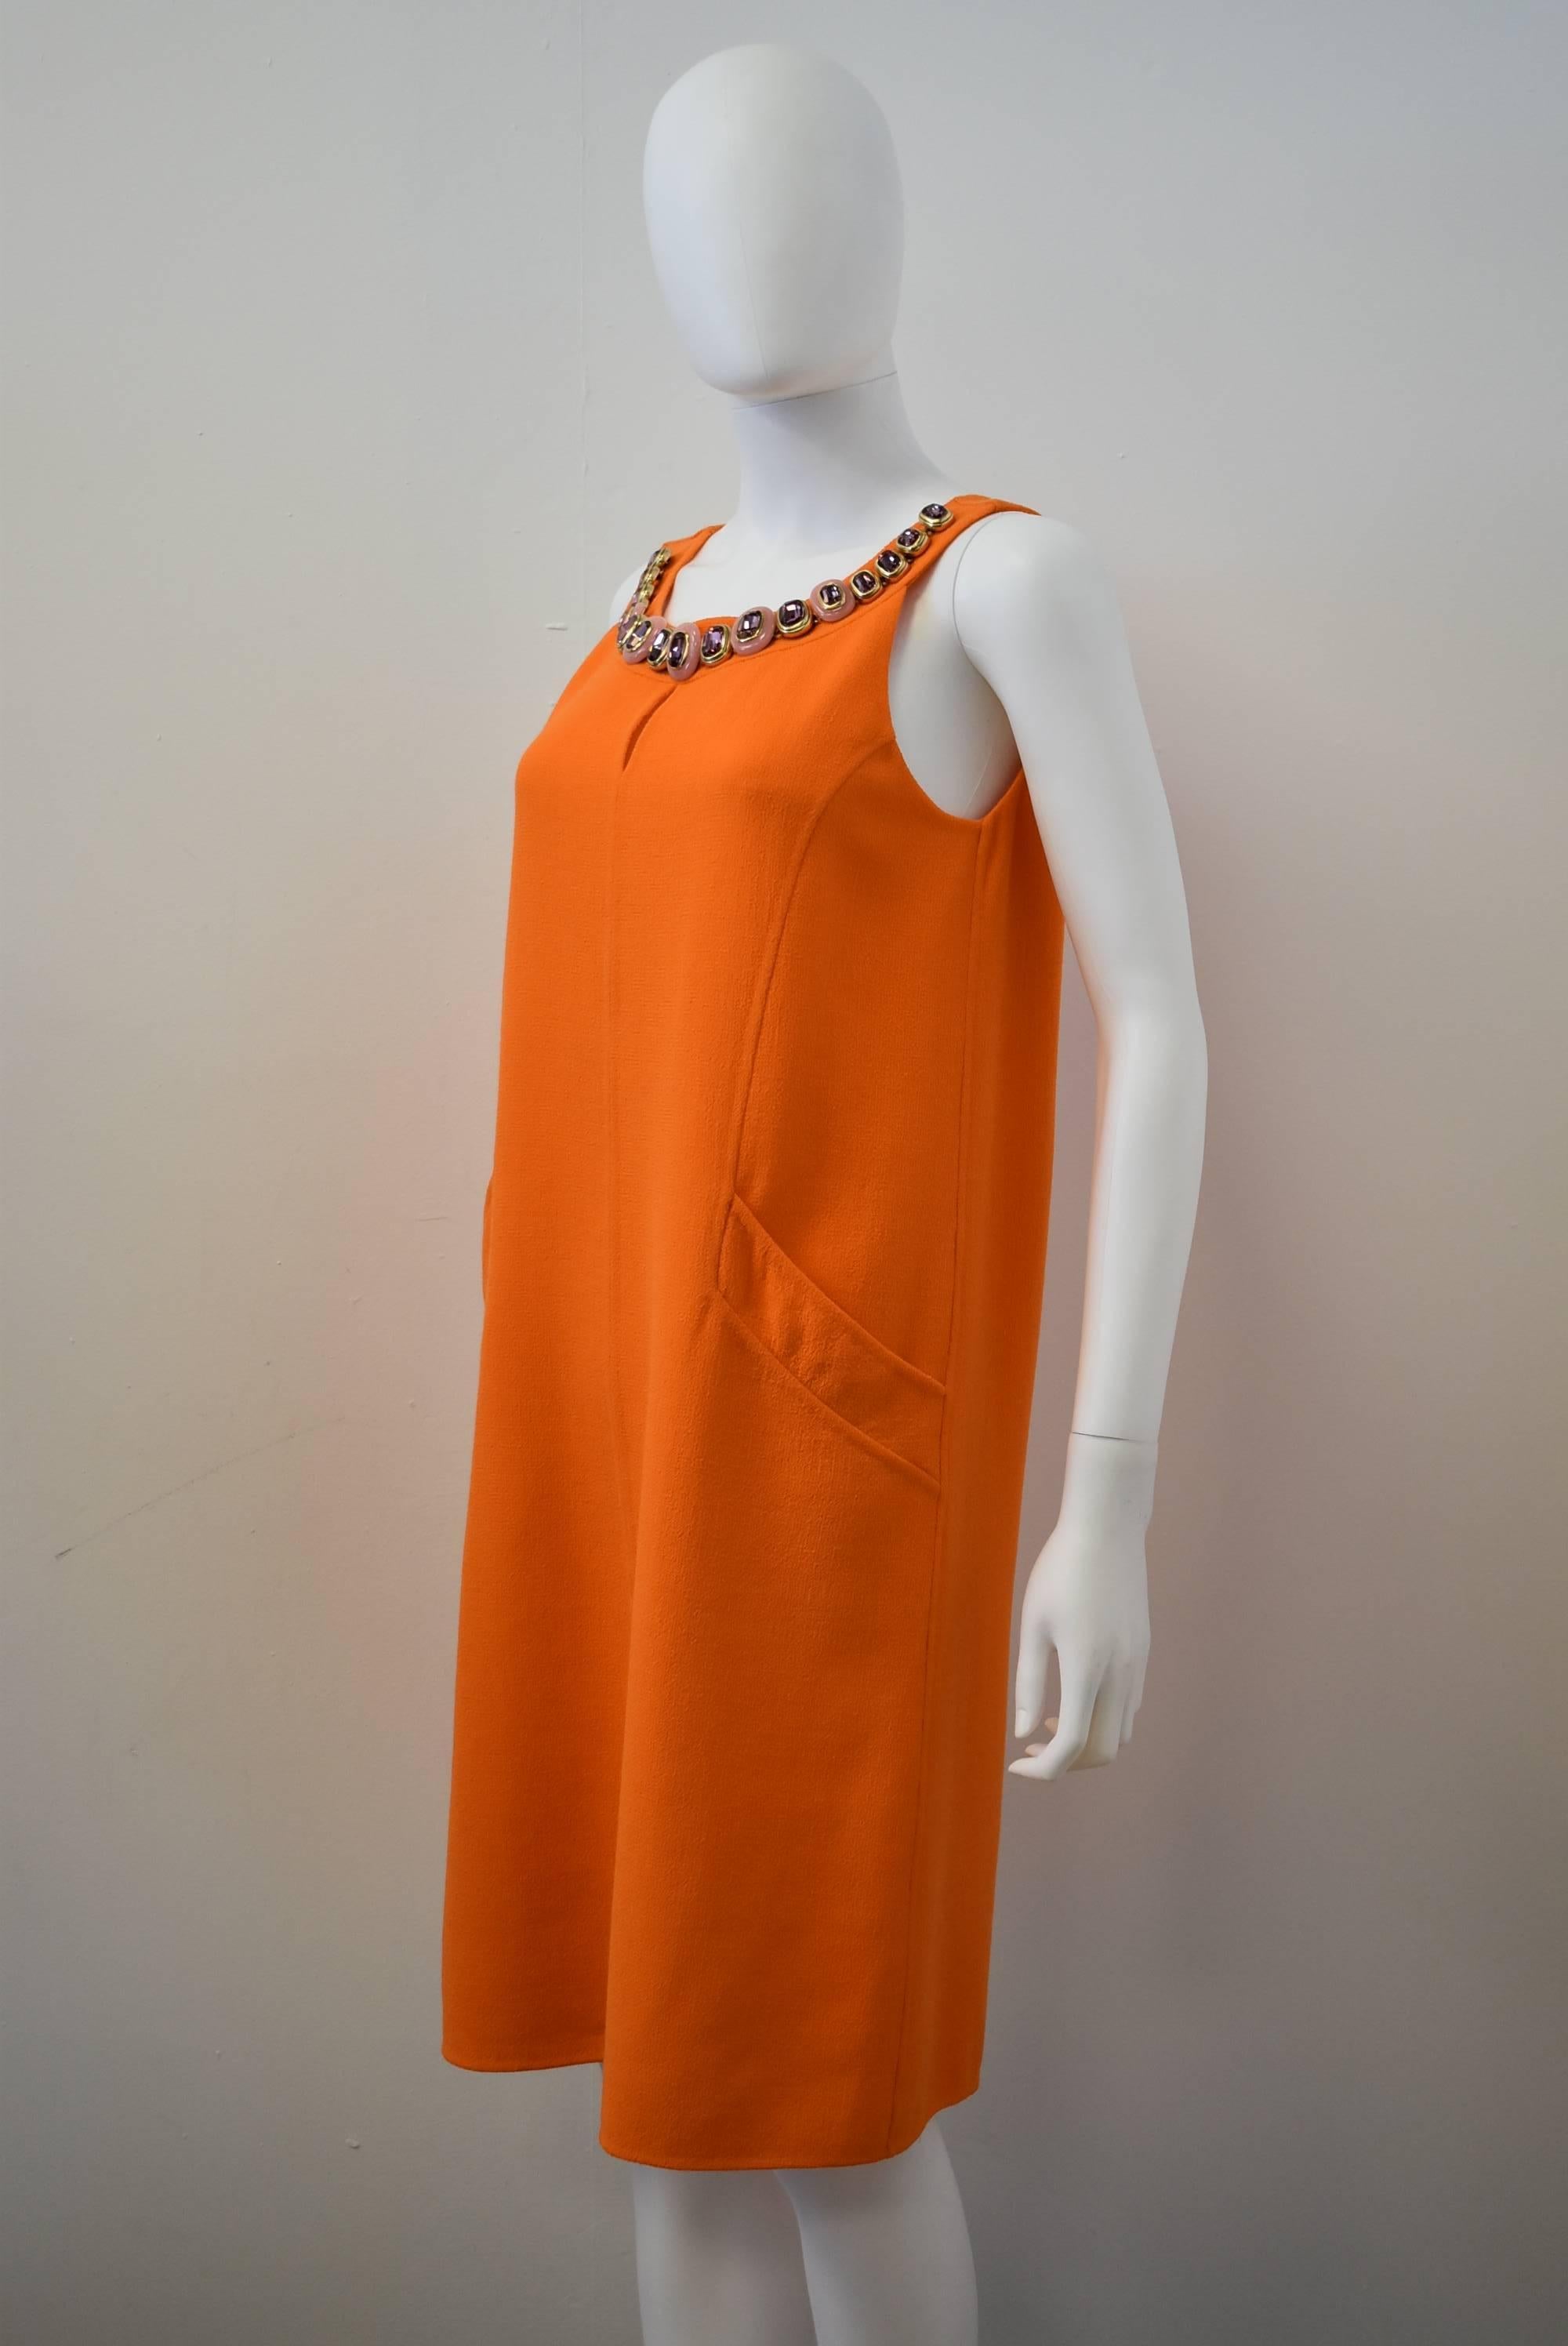 A simple and elegant bright orange shift dress with embellishment along the collar from Oscar de la Renta. The dress has a beautifully simple shape with eye-catching details such as large pockets at the hip, a keyhole cut-out at the décolletage and